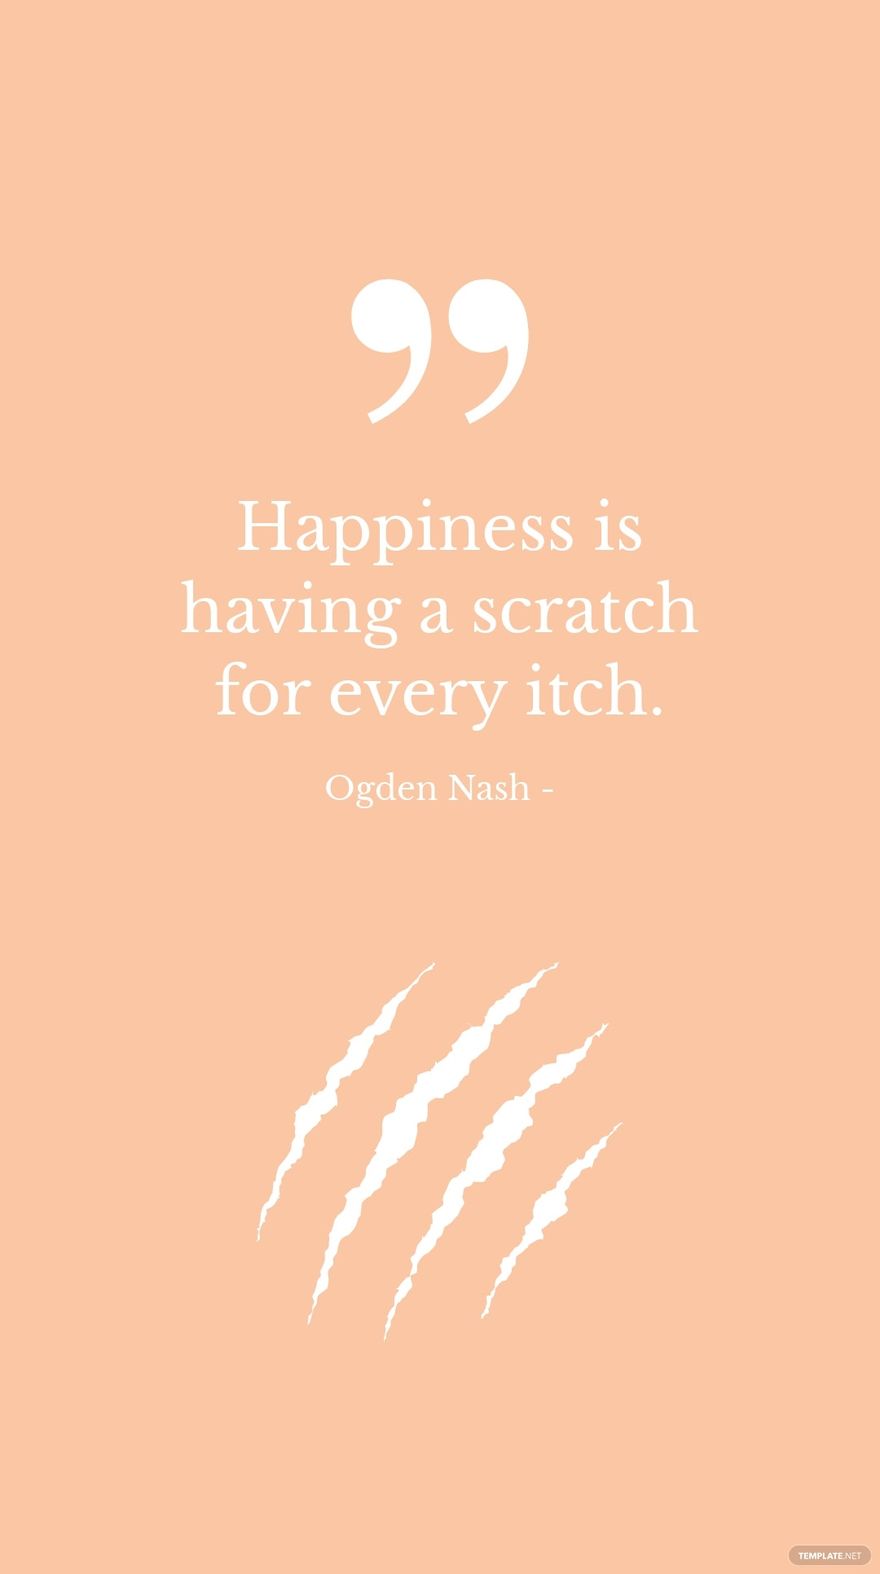 Free Ogden Nash - Happiness is having a scratch for every itch. in JPG